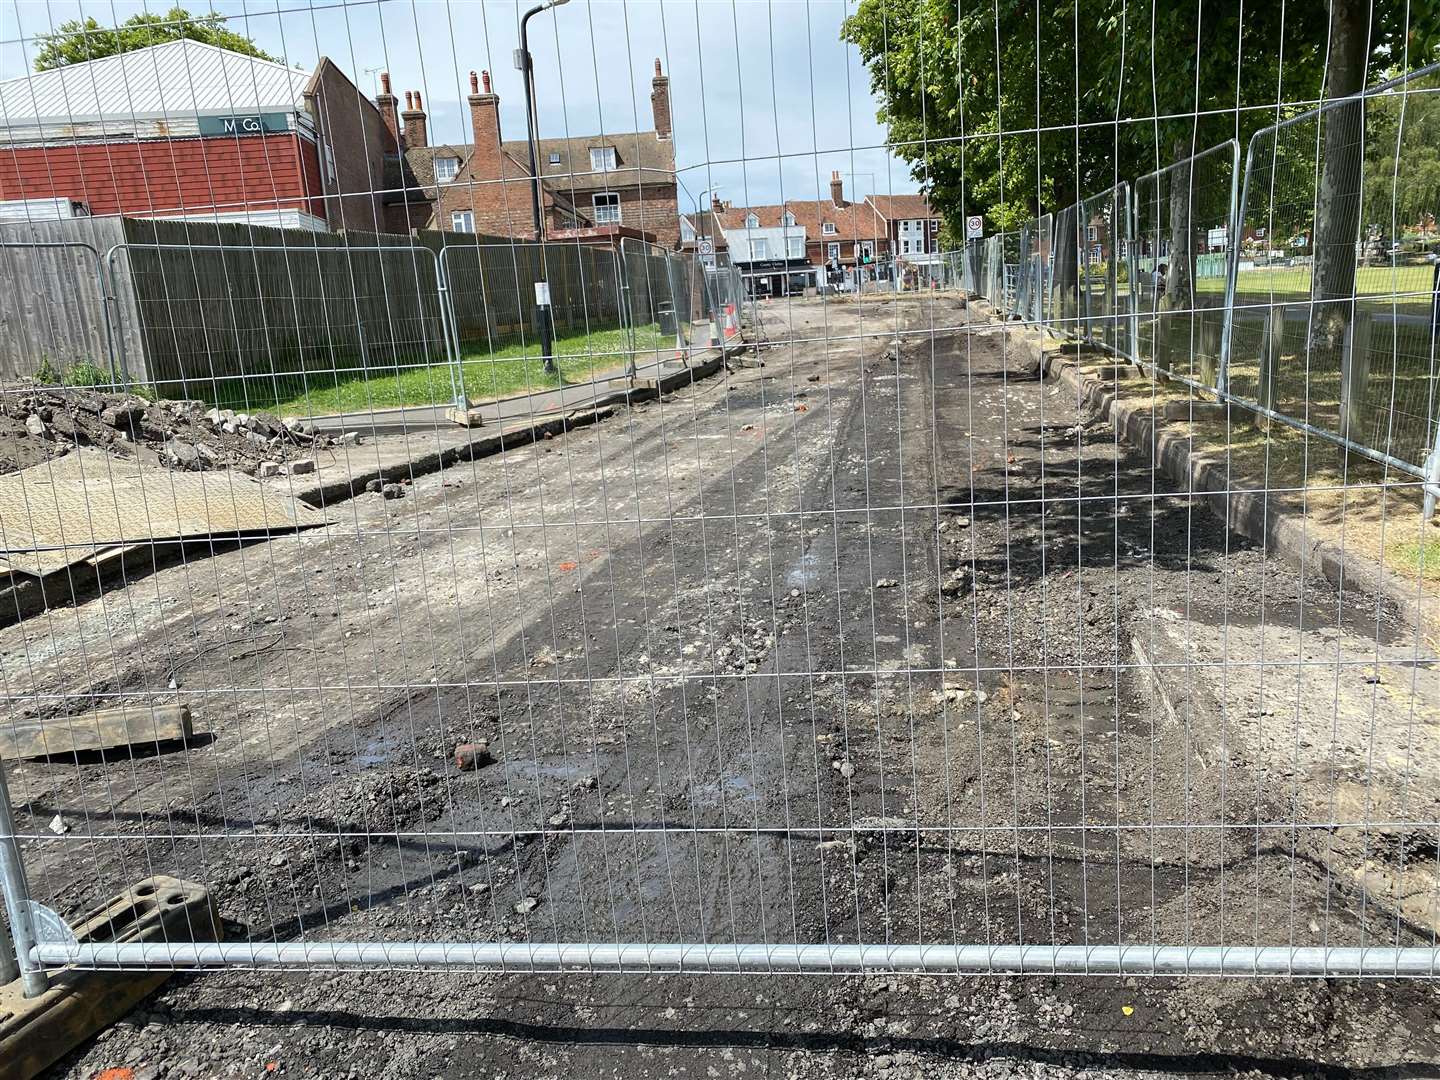 Locals say the roadworks are costing the town thousands of pounds per day. Photo: Sue Ferguson